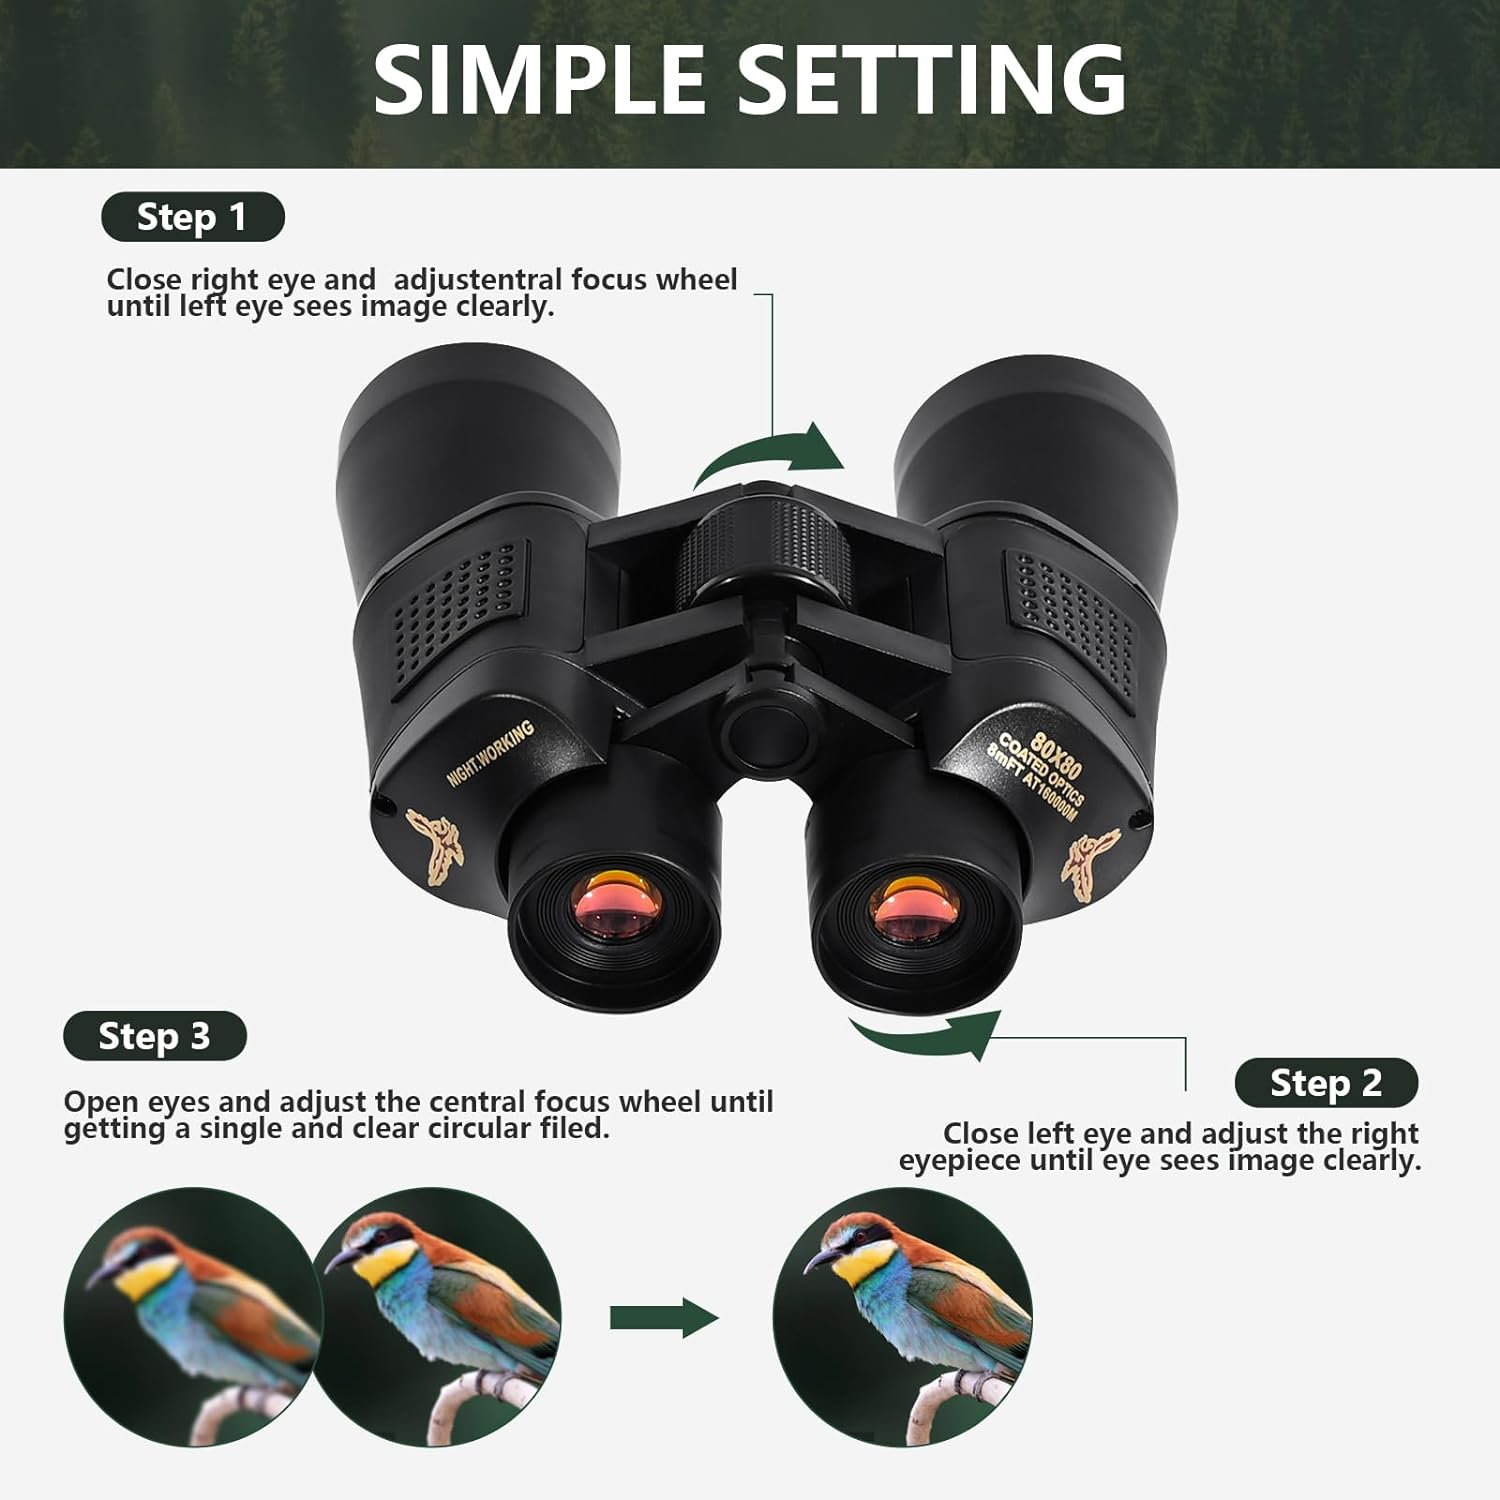 Amazon.com : Lolyer 10X50 Binoculars for Adults High Powered, Waterproof HD Binoculars for Bird Watching, Travel, Hiking, Hunting, Concert, Cruise Ship, Stargazing, Outdoor Sport with Carrying Bag and Neck Strap : Electronics